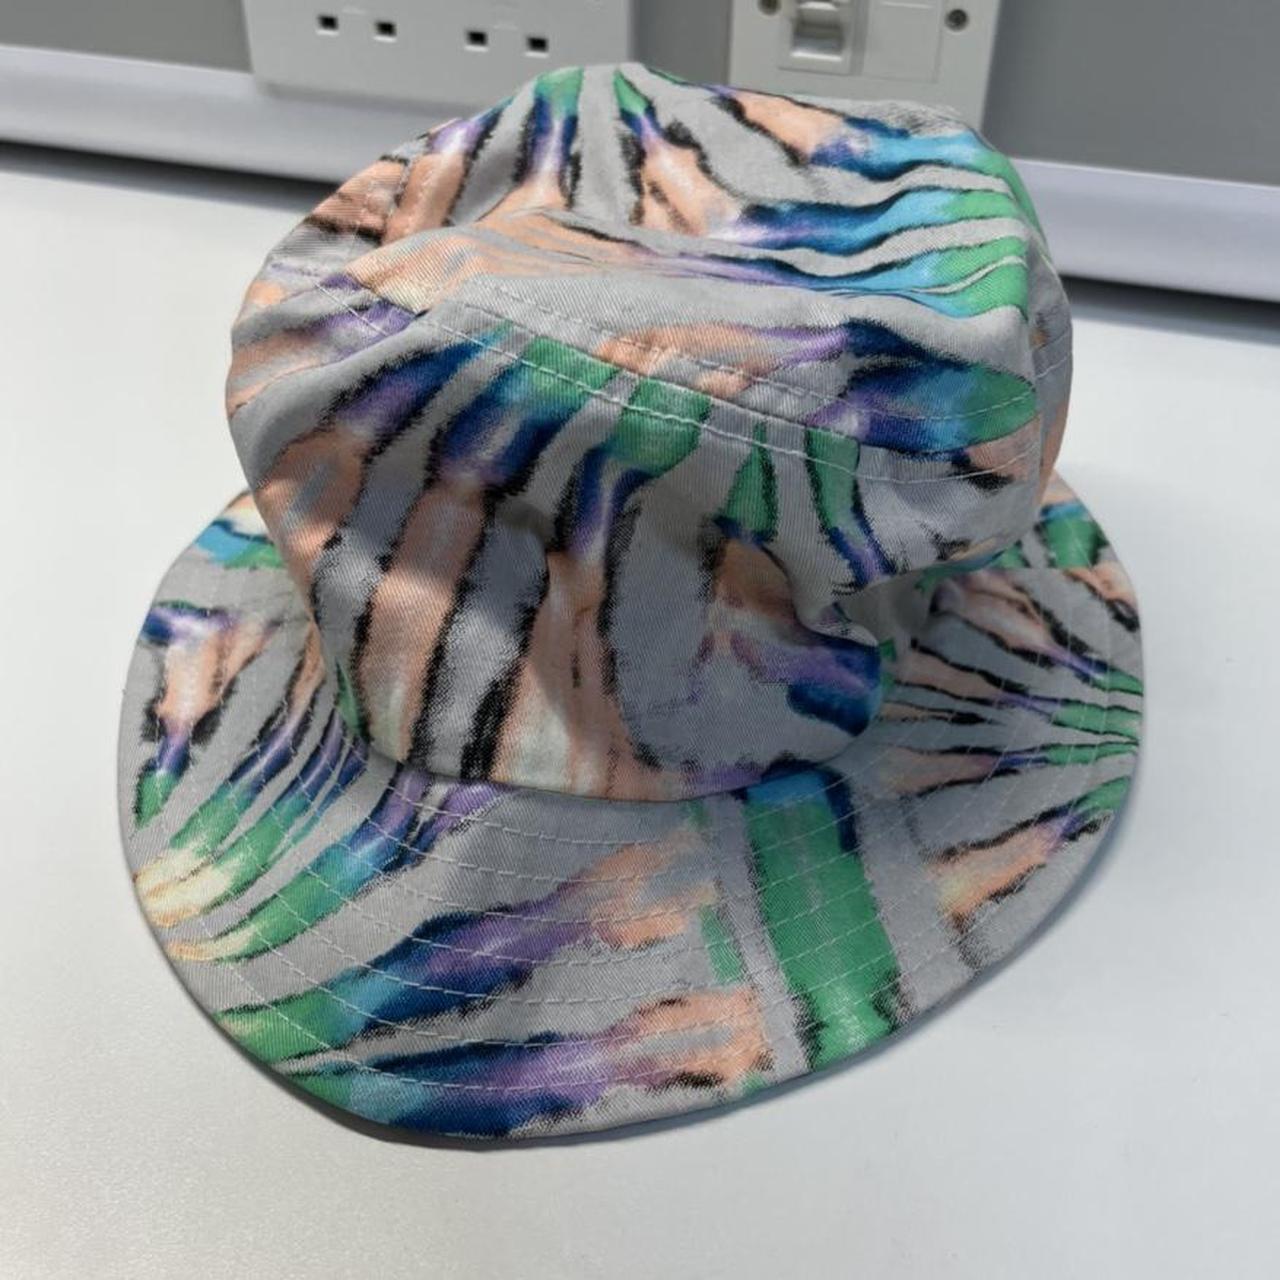 Product Image 2 - Stussy Bucket Hat in "Rainbow"
Condition: